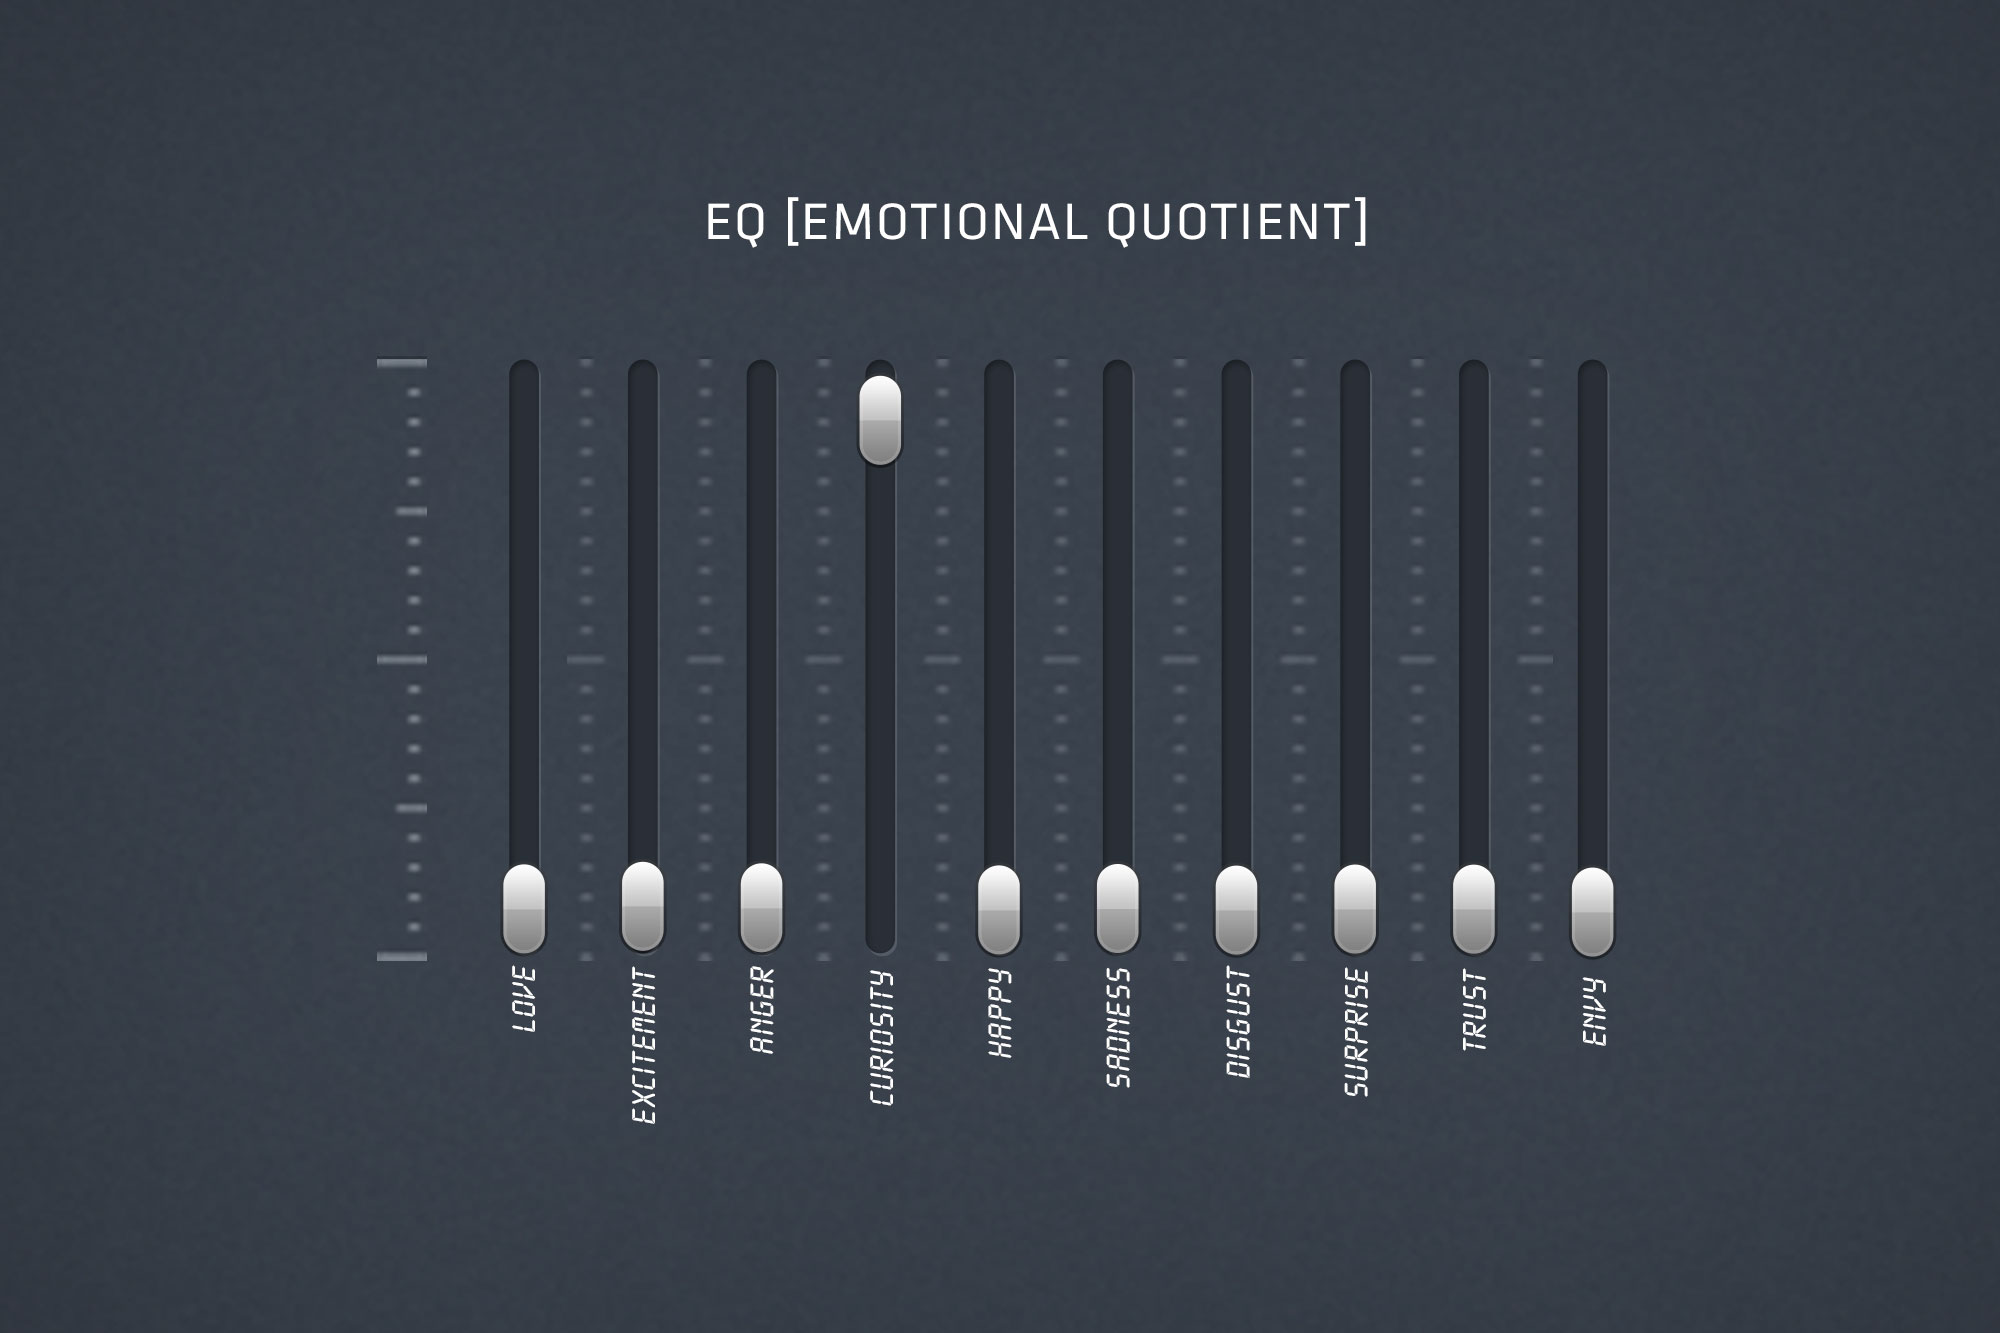 EQ Emotional quotient switch board